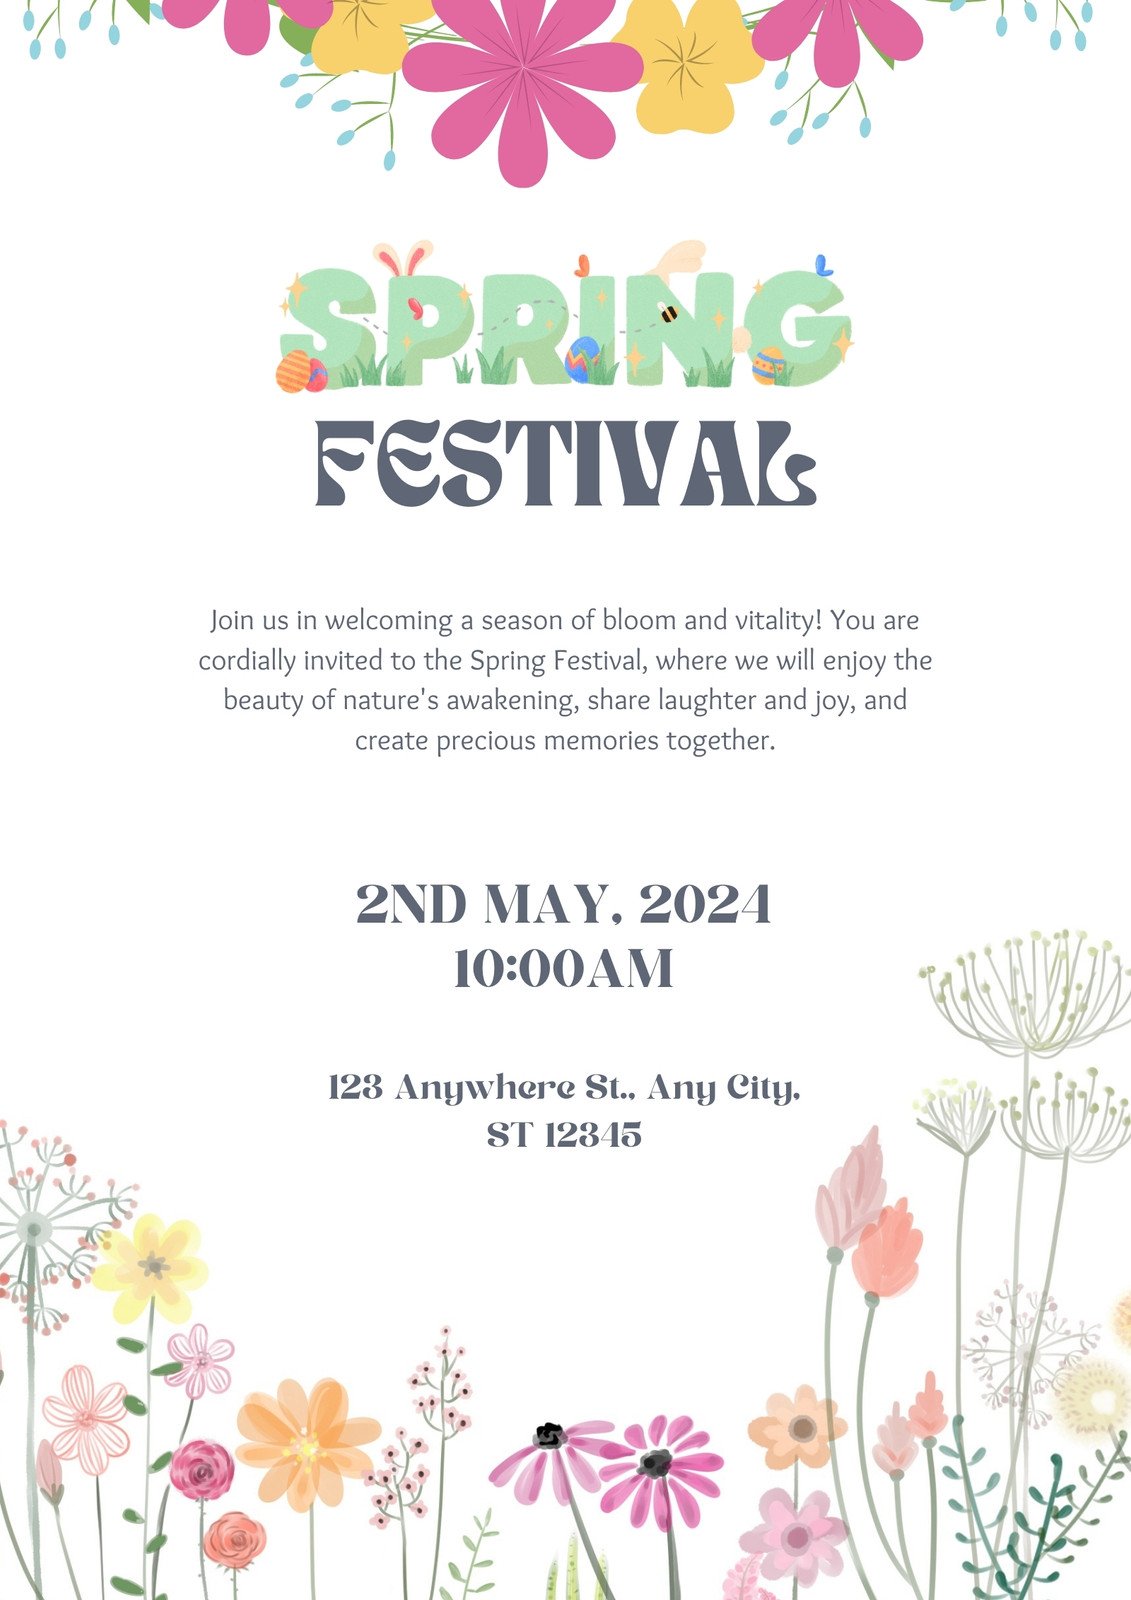 White and Green Colorful Spring Festival Flyer